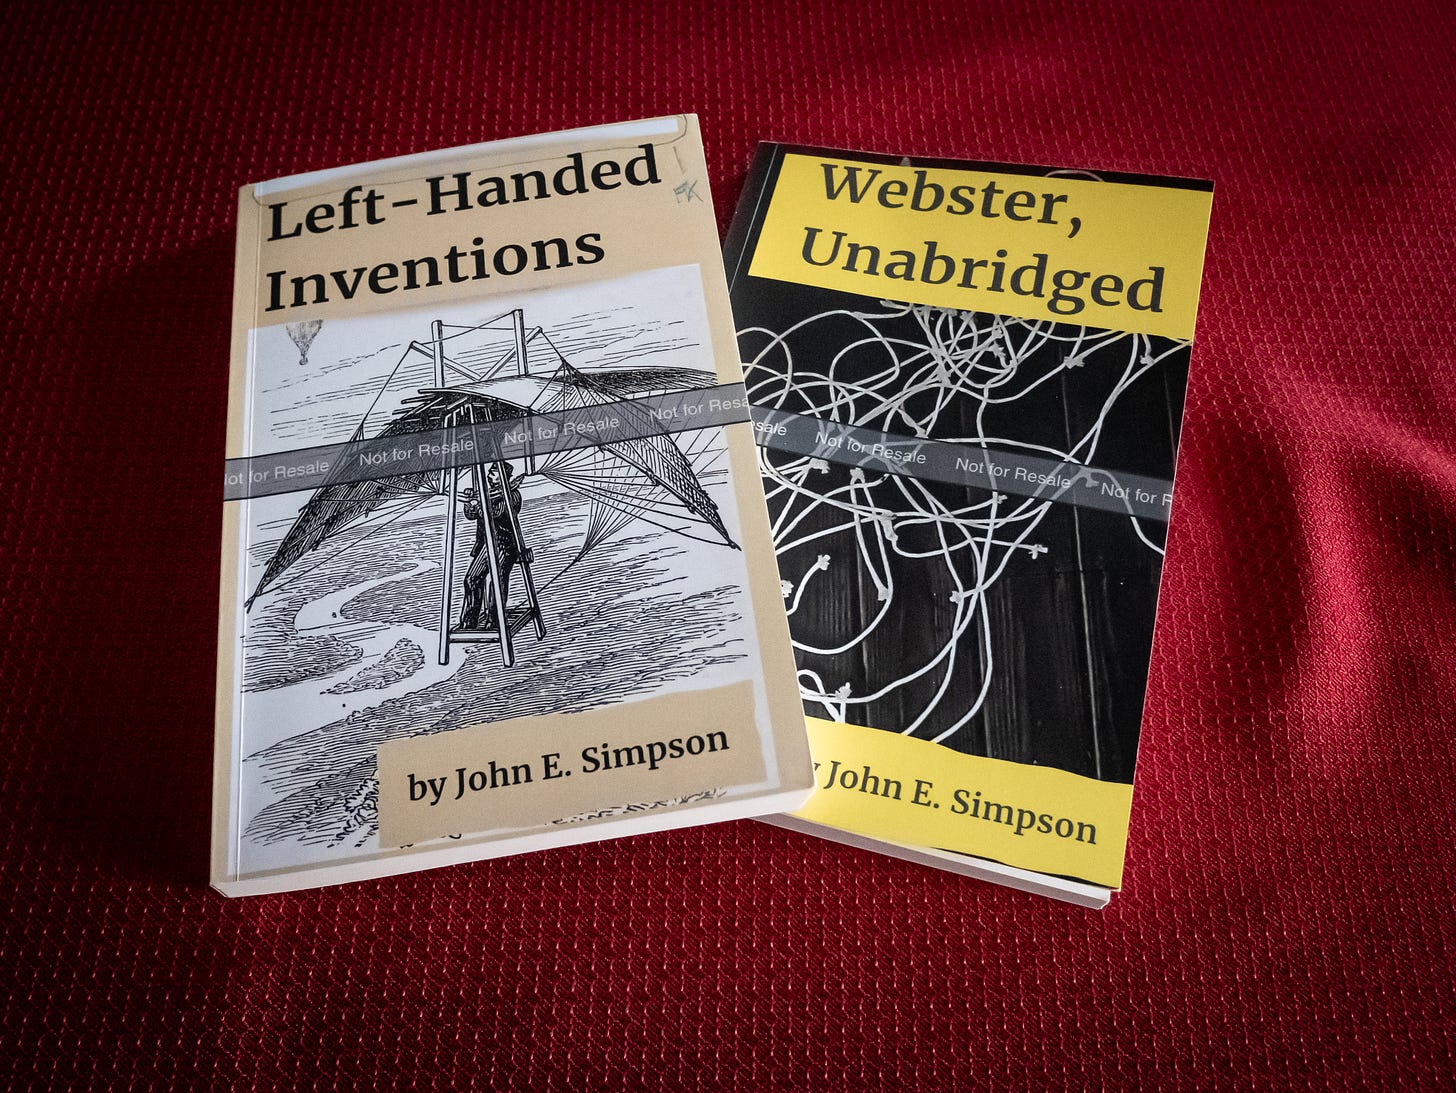 A photograph of two 6" x 9" paperback books by the author, lying on a table covered with red cloth. One book is called 'Left-Handed Inventions'; the other, 'Webster, Unabridged.' Both book covers include a grey band running across the middle, labeled "Not for Resale."